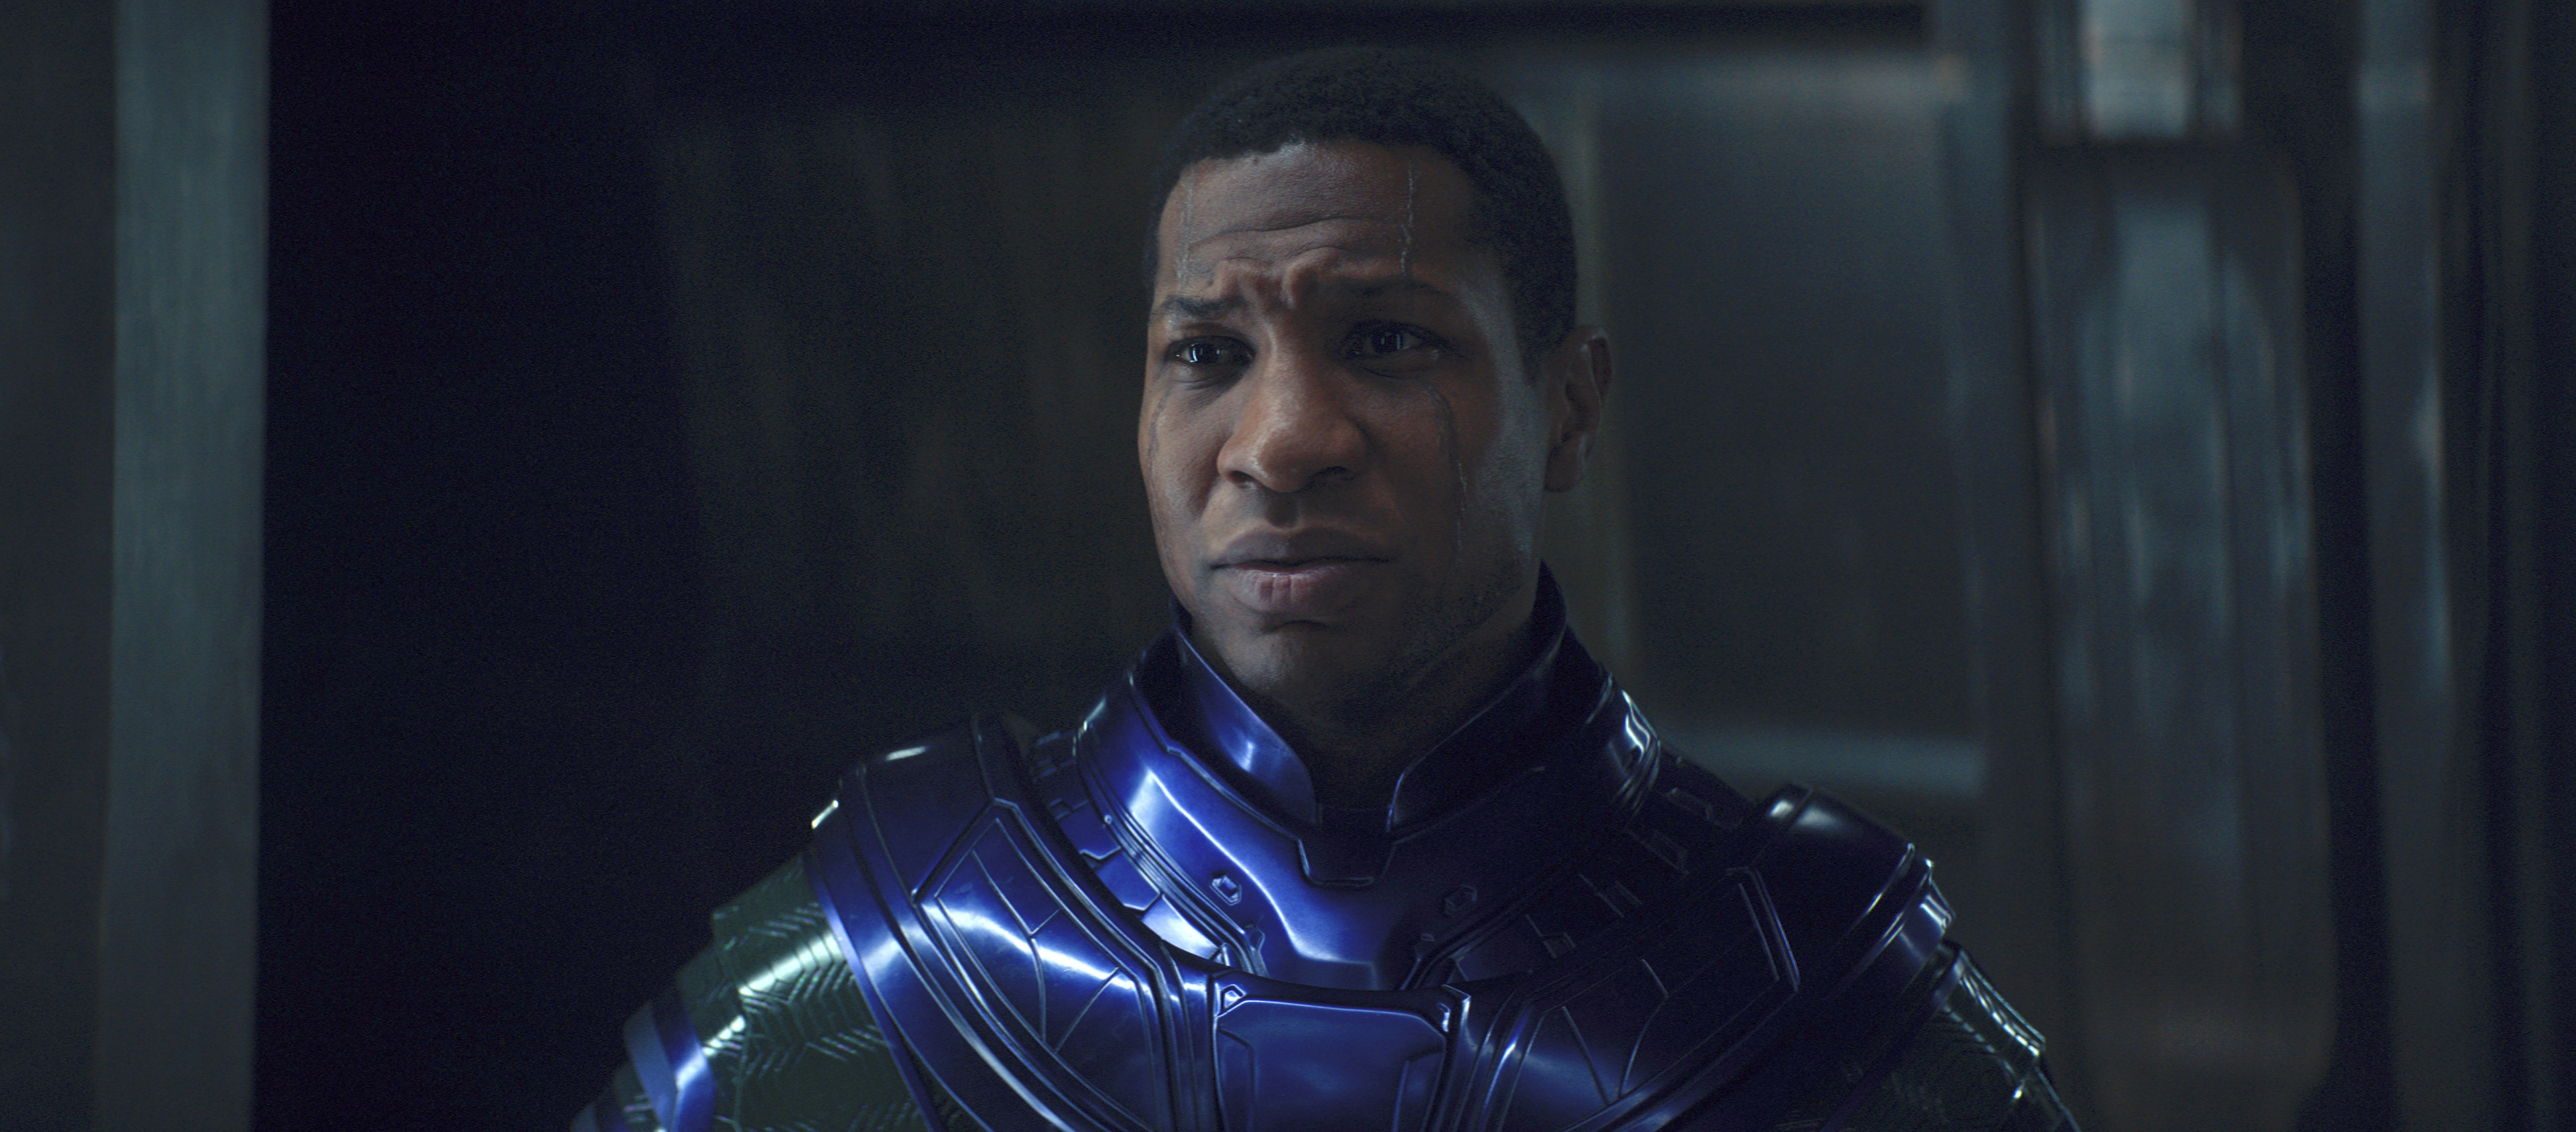 Jonathan Majors as Kang the Conqueror in Ant-Man and the Wasp: Quantumania. He wears a shiny, engraved power suit and sad. His face has two scars that run from from hairline to eyebrow and then cheek to jaw.